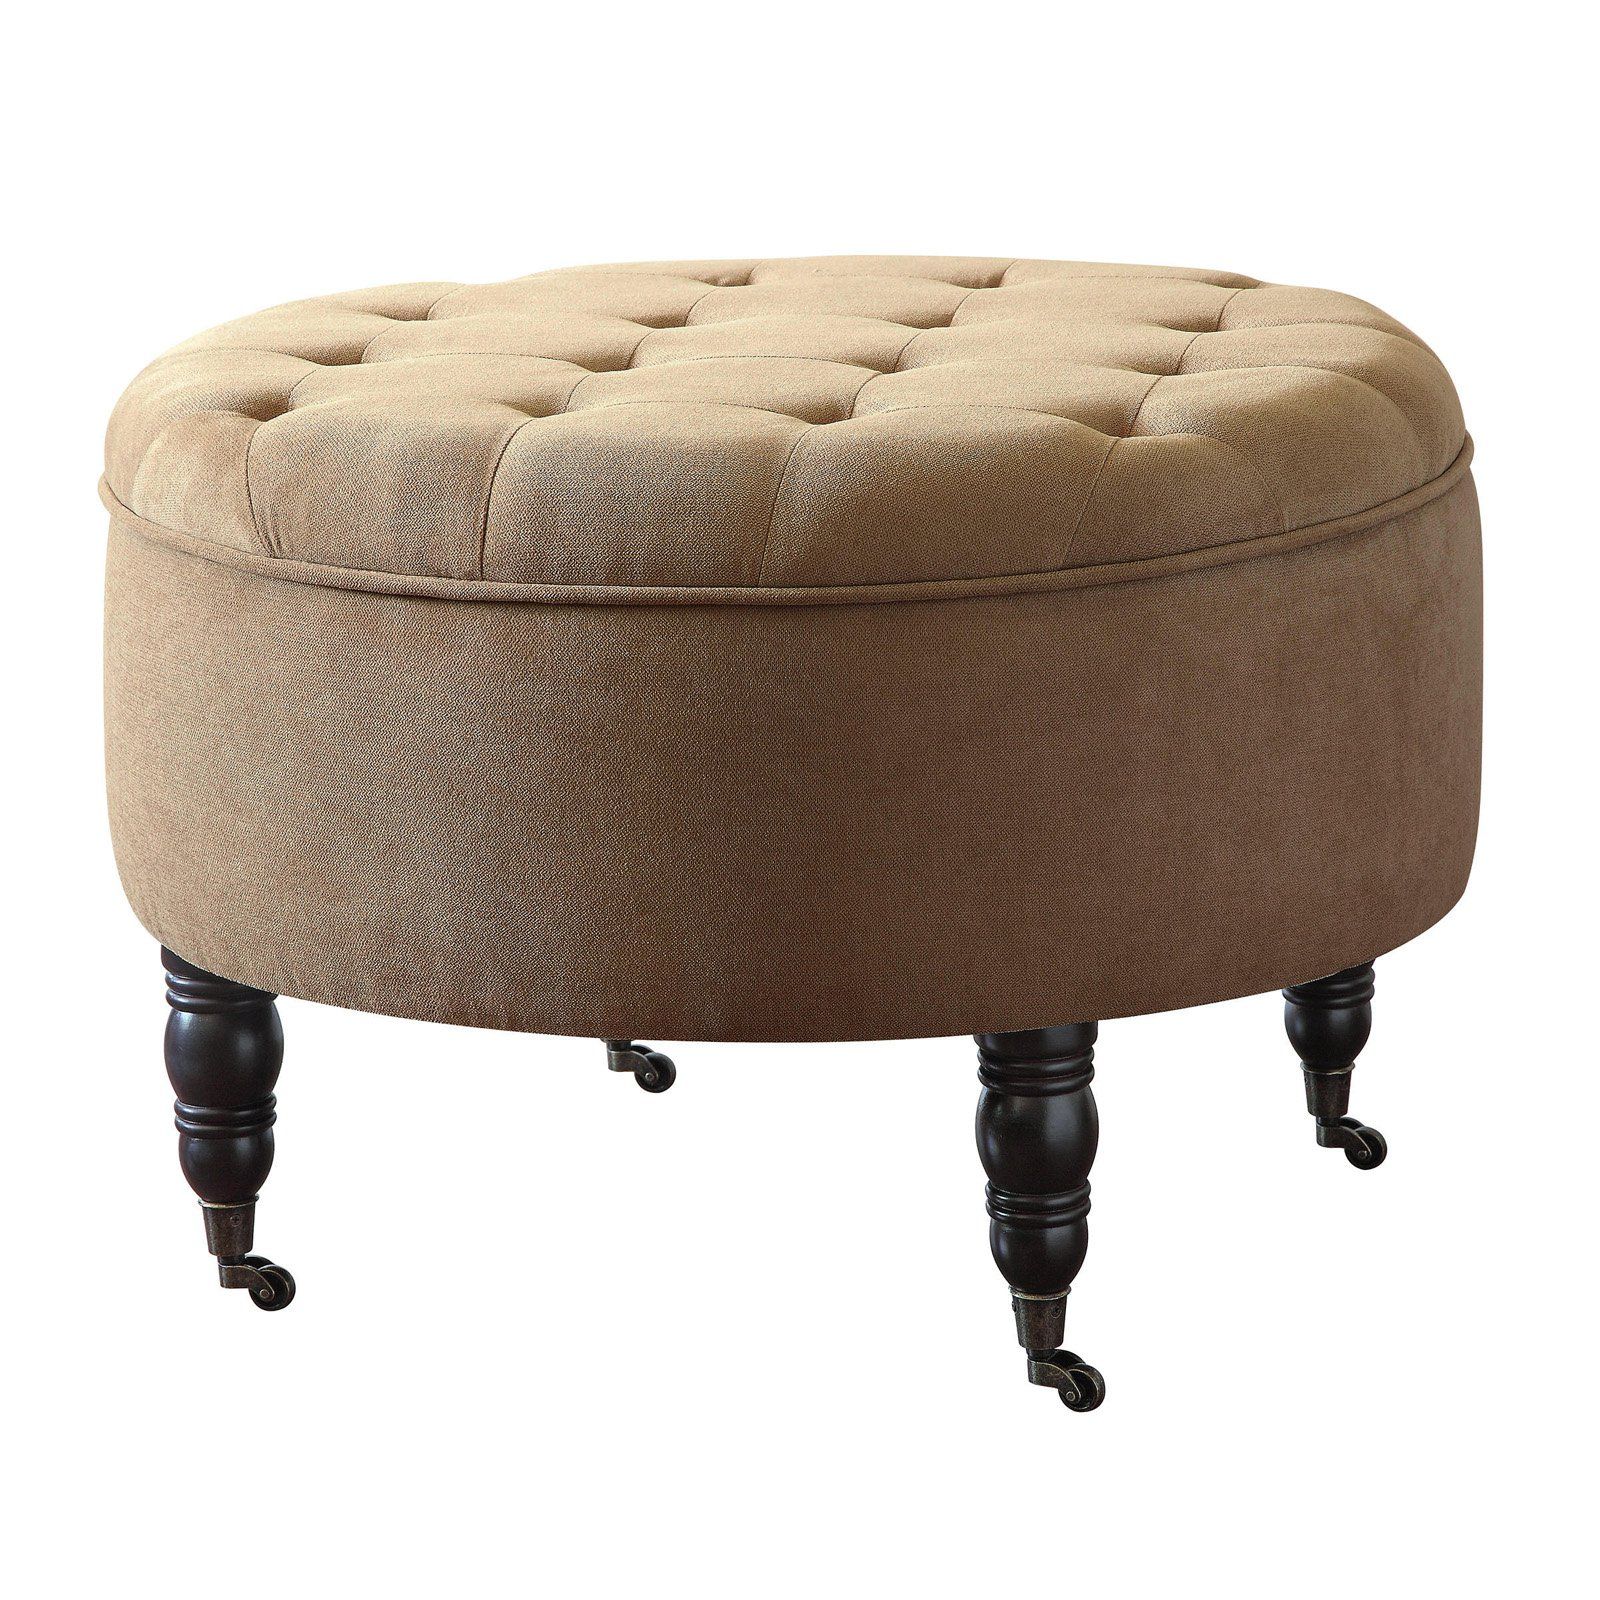 Wool Round Pouf Ottomans With Well Known Elle Decor Quinn Round Tufted Ottoman With Storage And Casters (View 2 of 10)